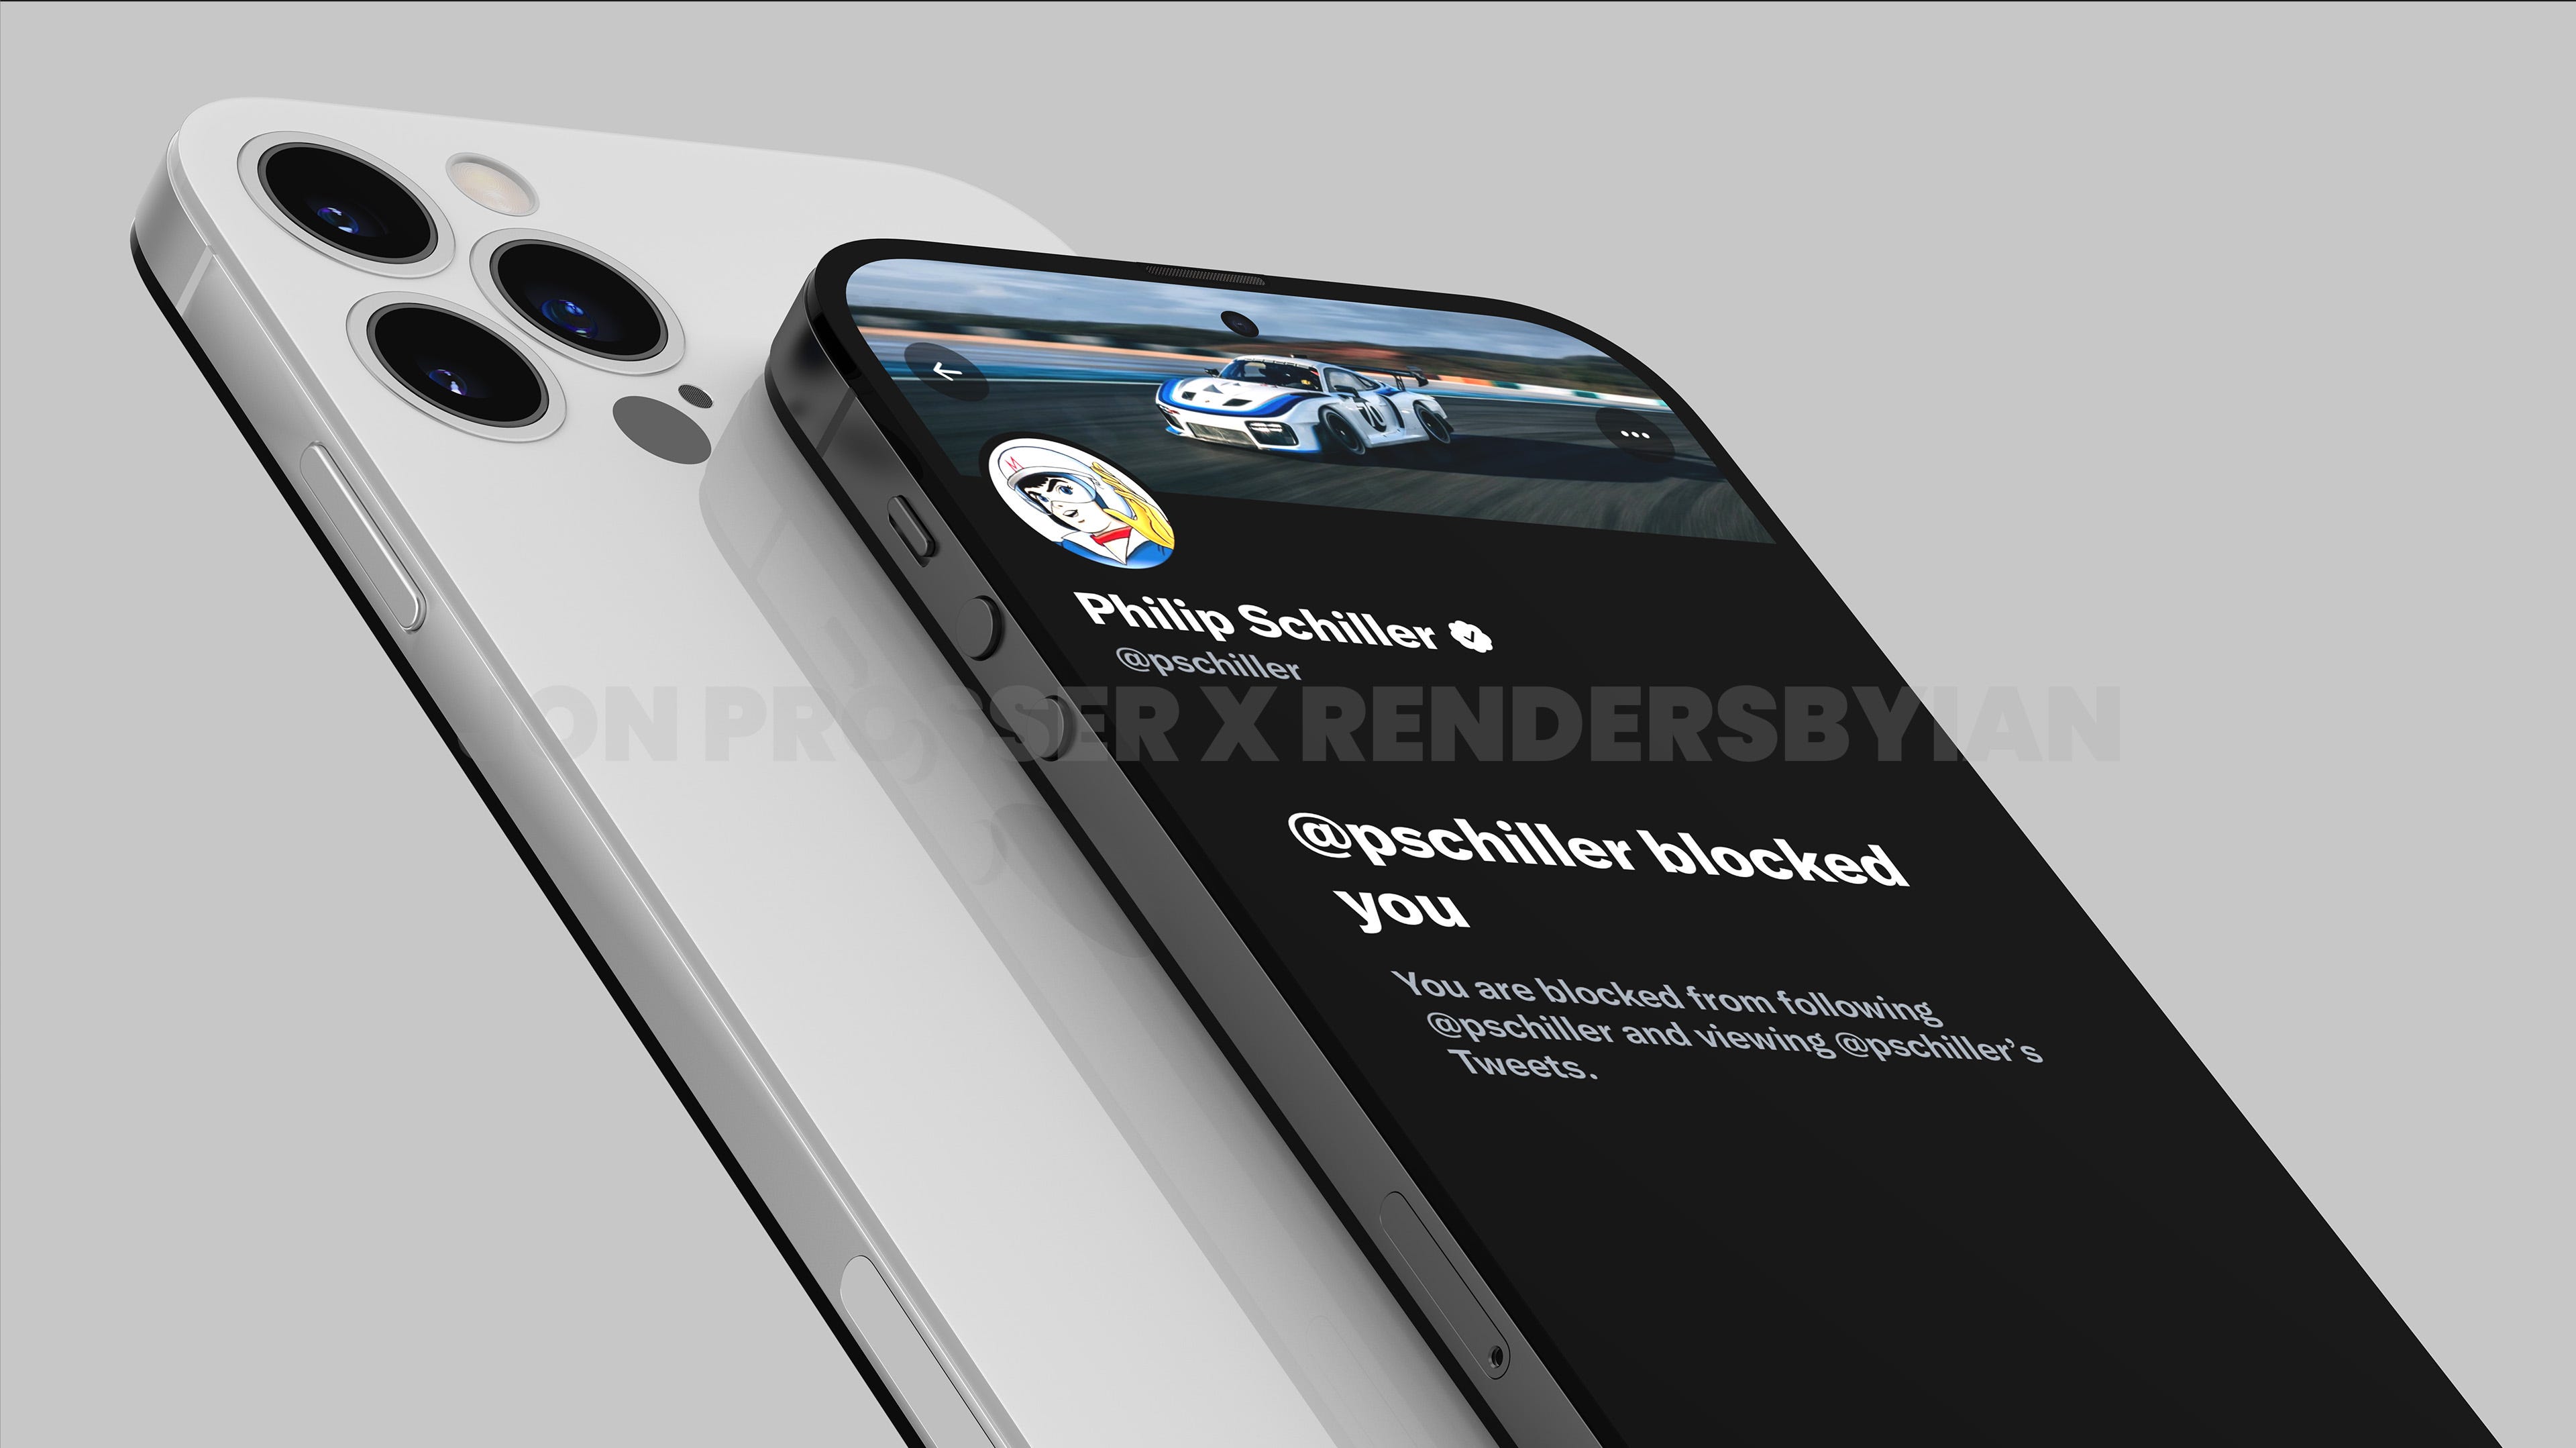 Apple iPhone 14: Release Date, Price and Every Other Noteworthy Rumor
                        Will the new iPhone be announced in September? Here's what rumors say.